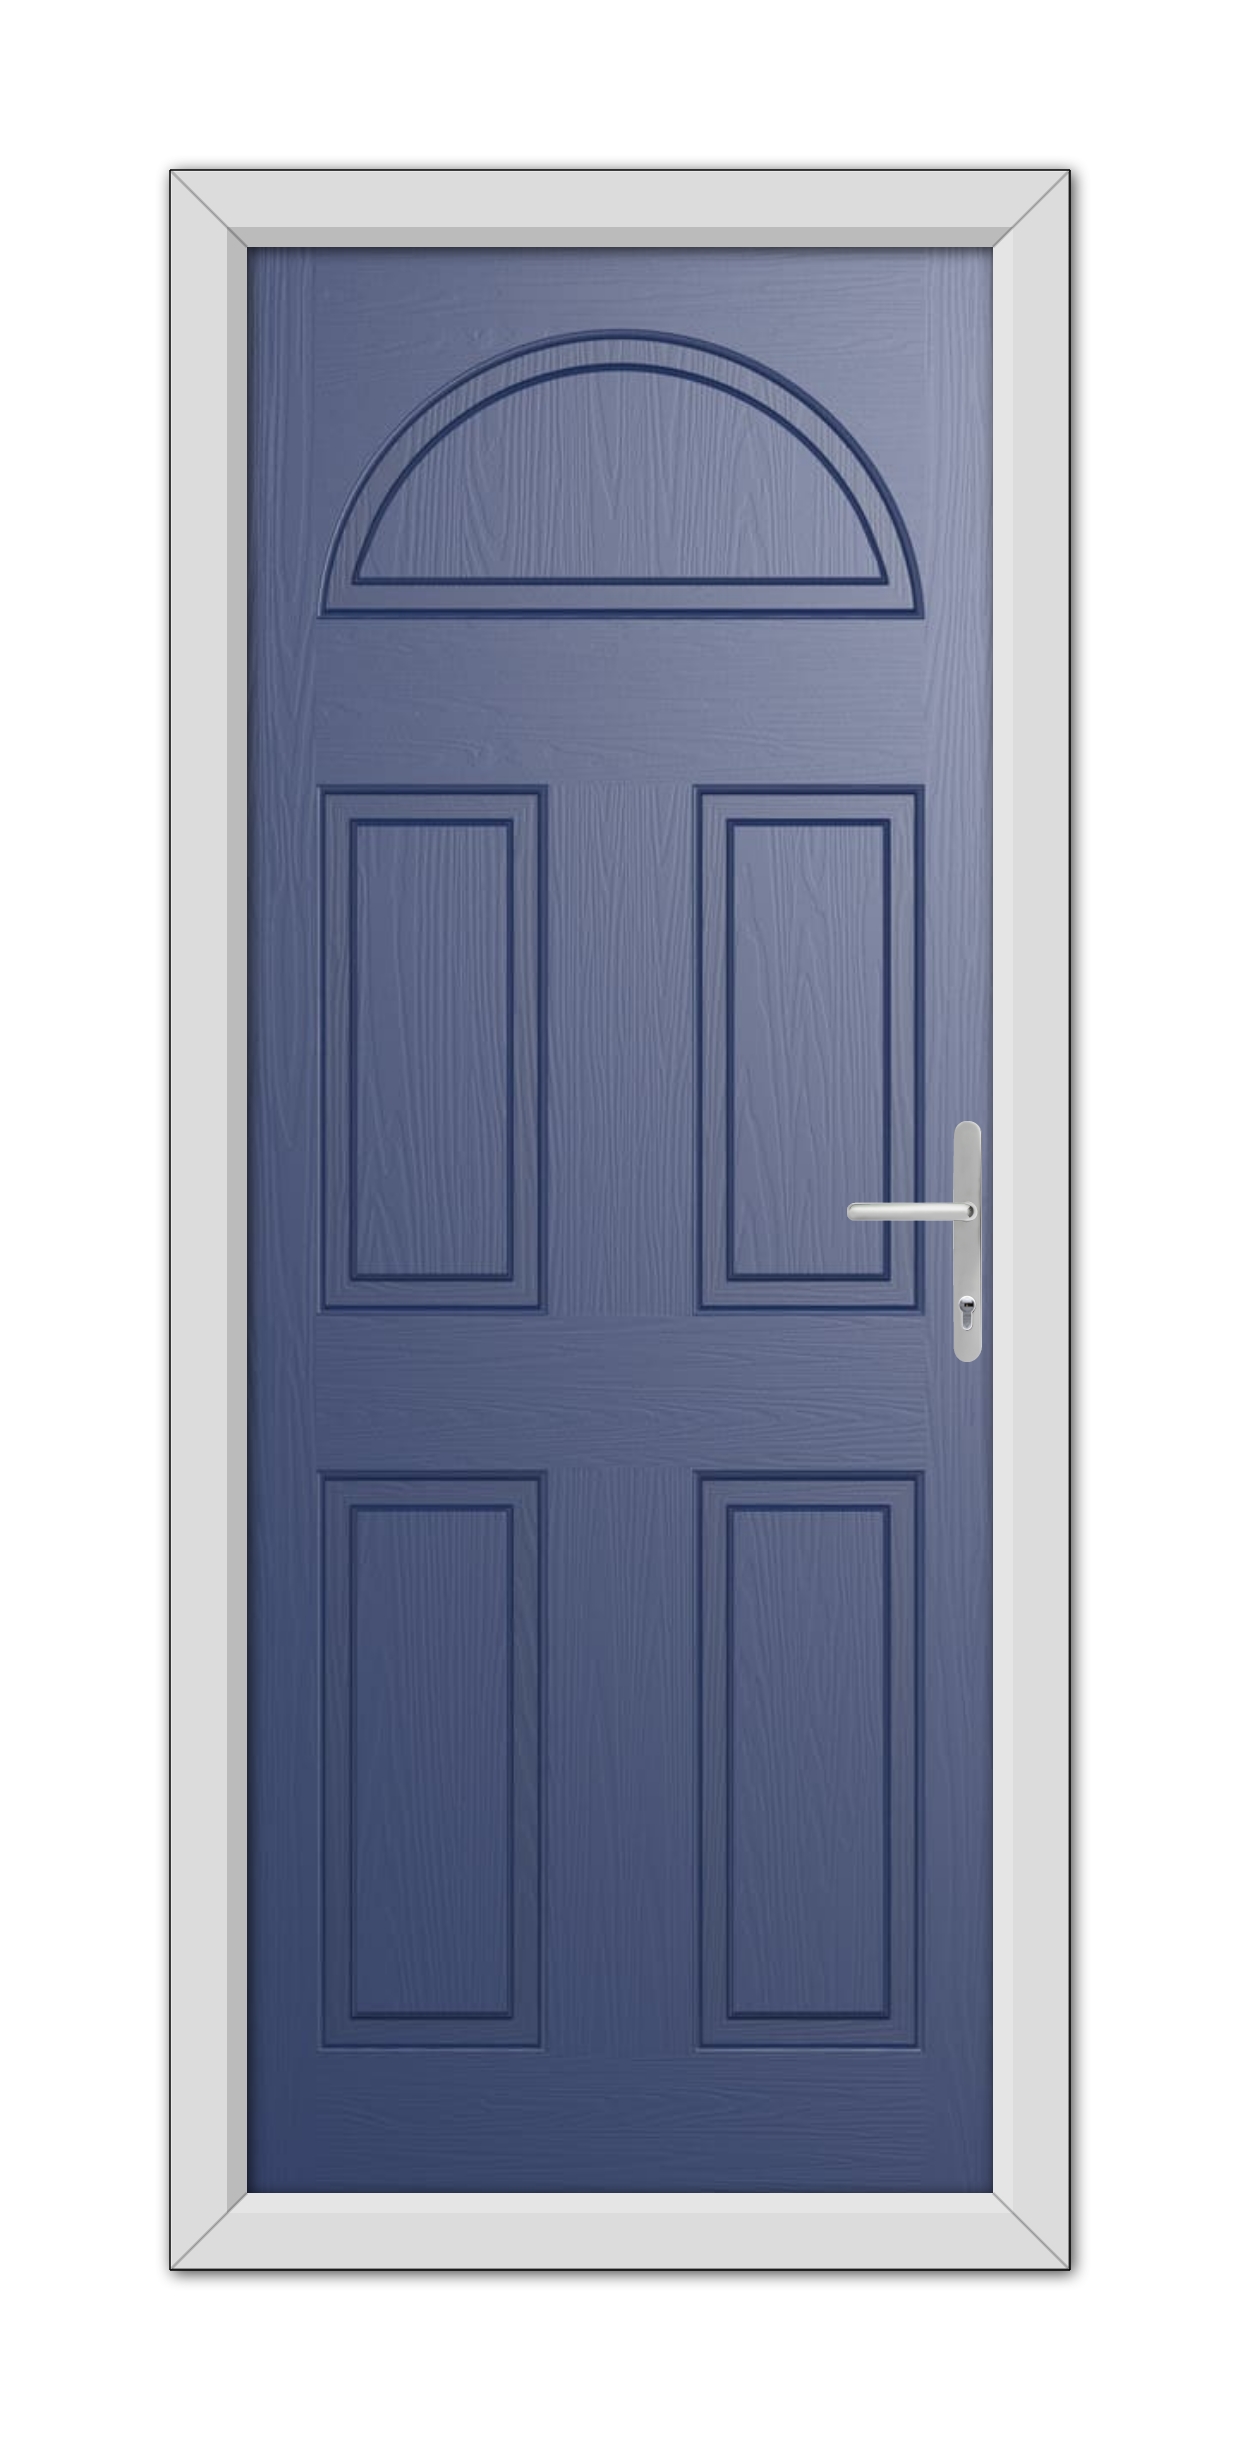 A Blue Middleton Solid Stable Composite Door 48mm Timber Core with six panels and a semi-circular transom window, framed in white with a modern handle on the right side.